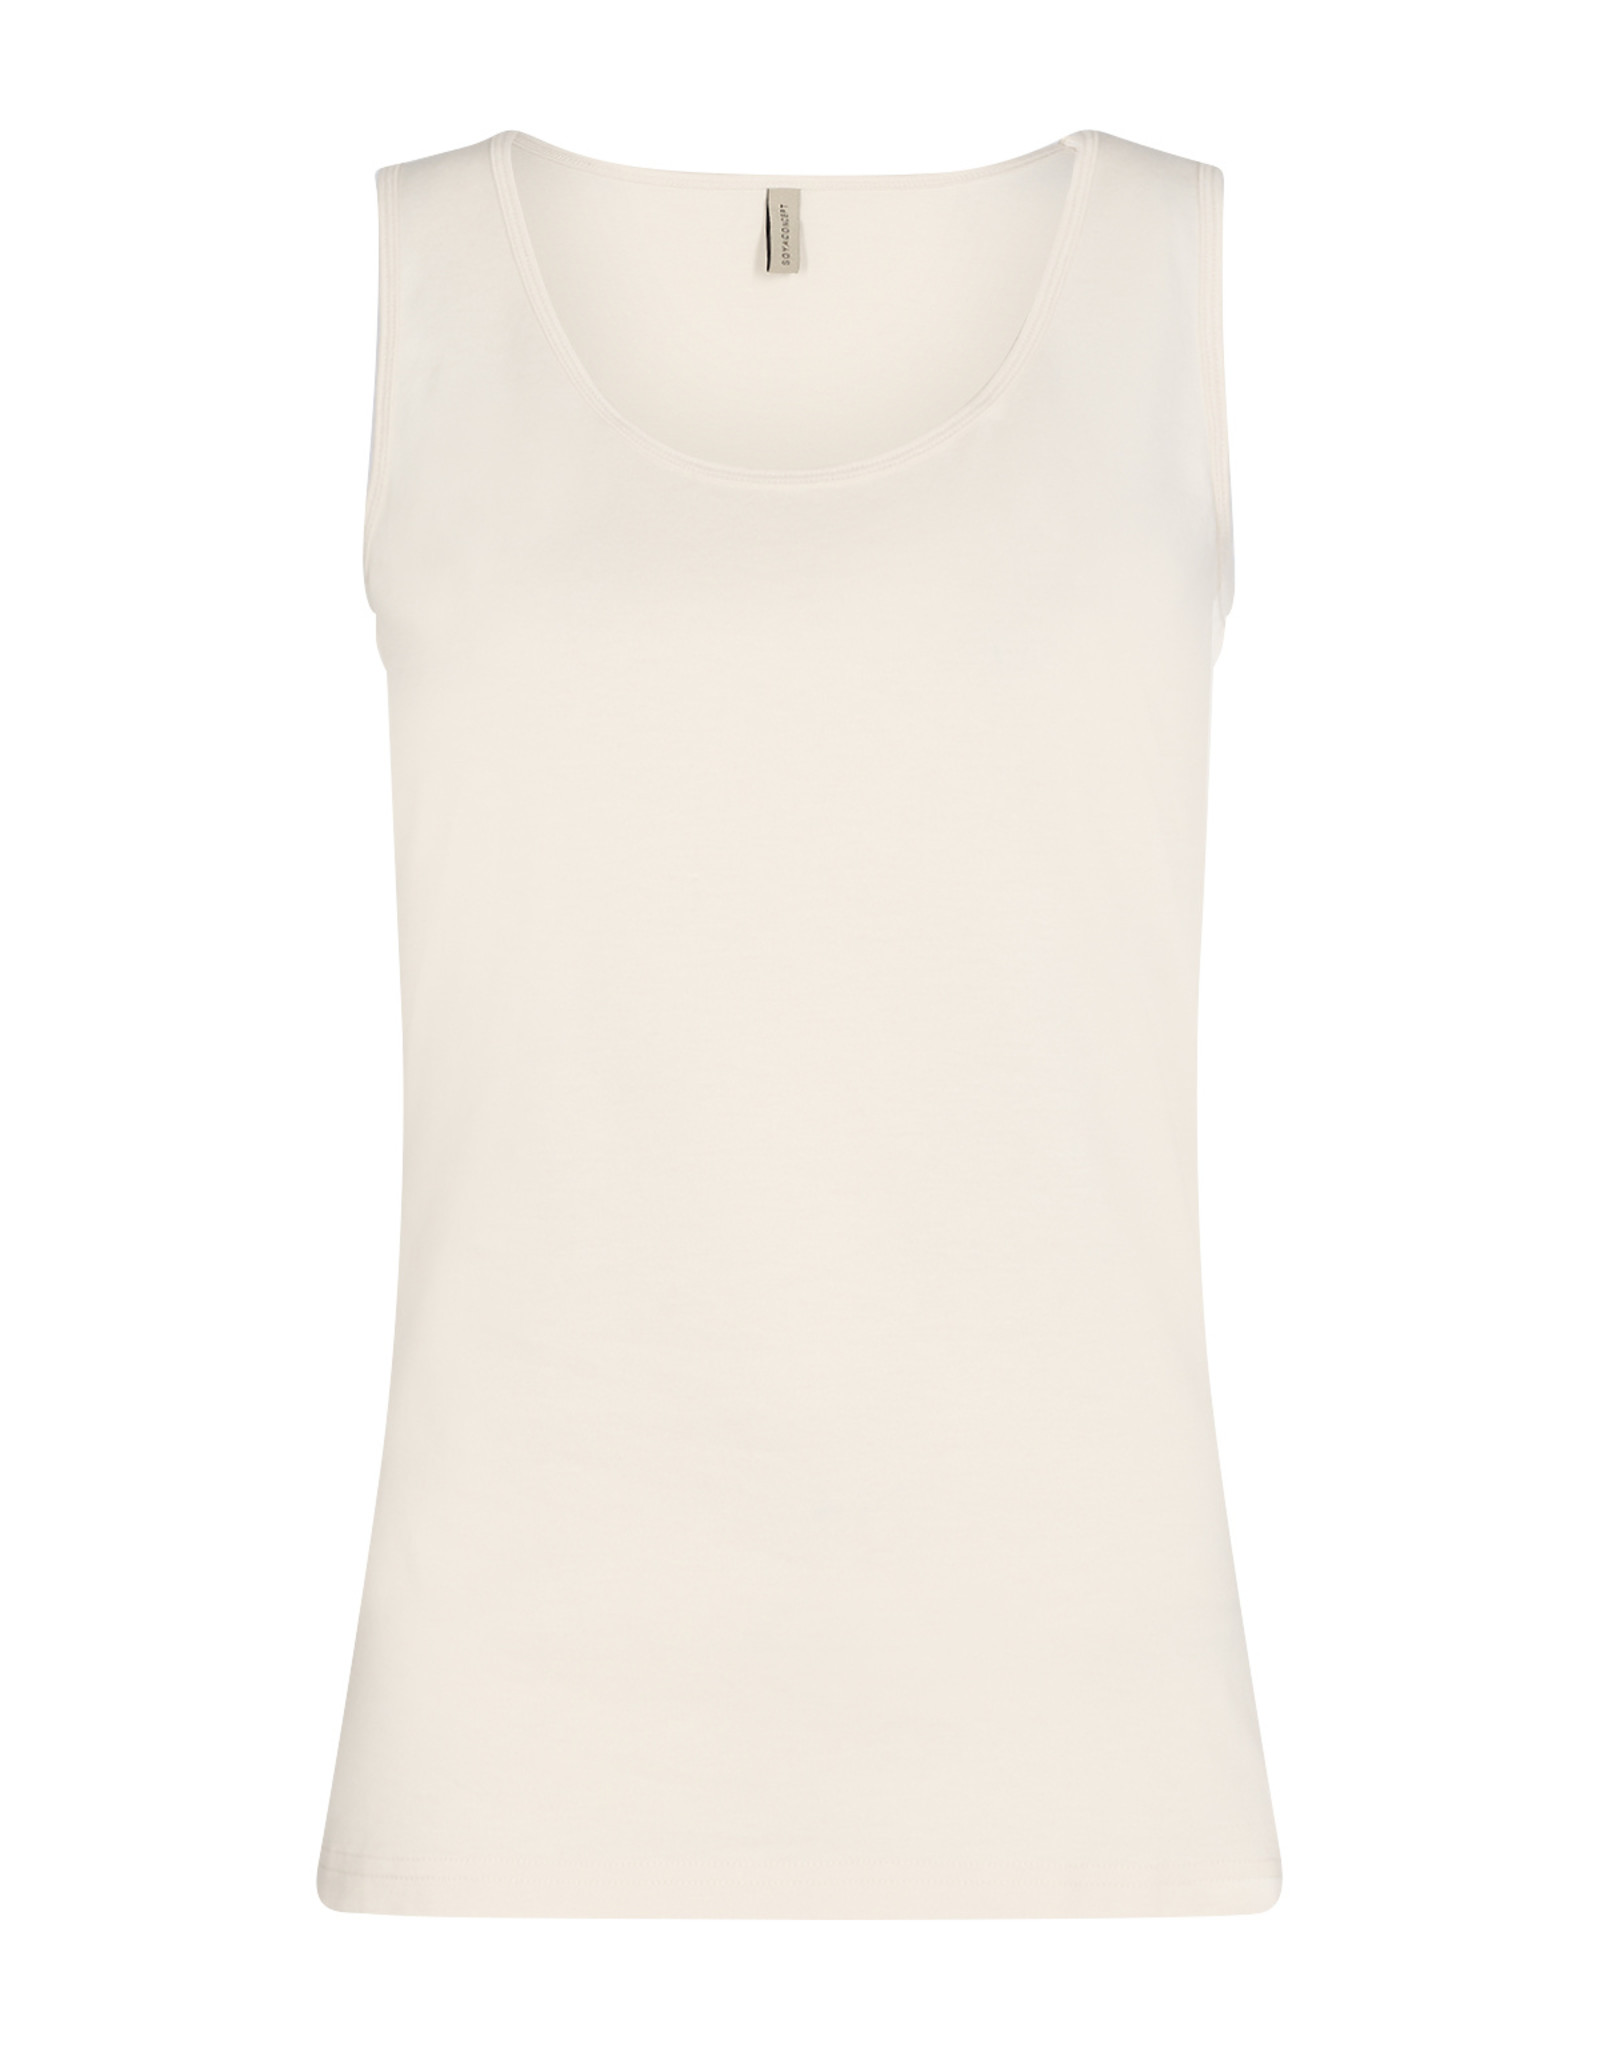 Soya Concept Soya Concept Pylle 3 Sleeveless Cami with a Round Neckline